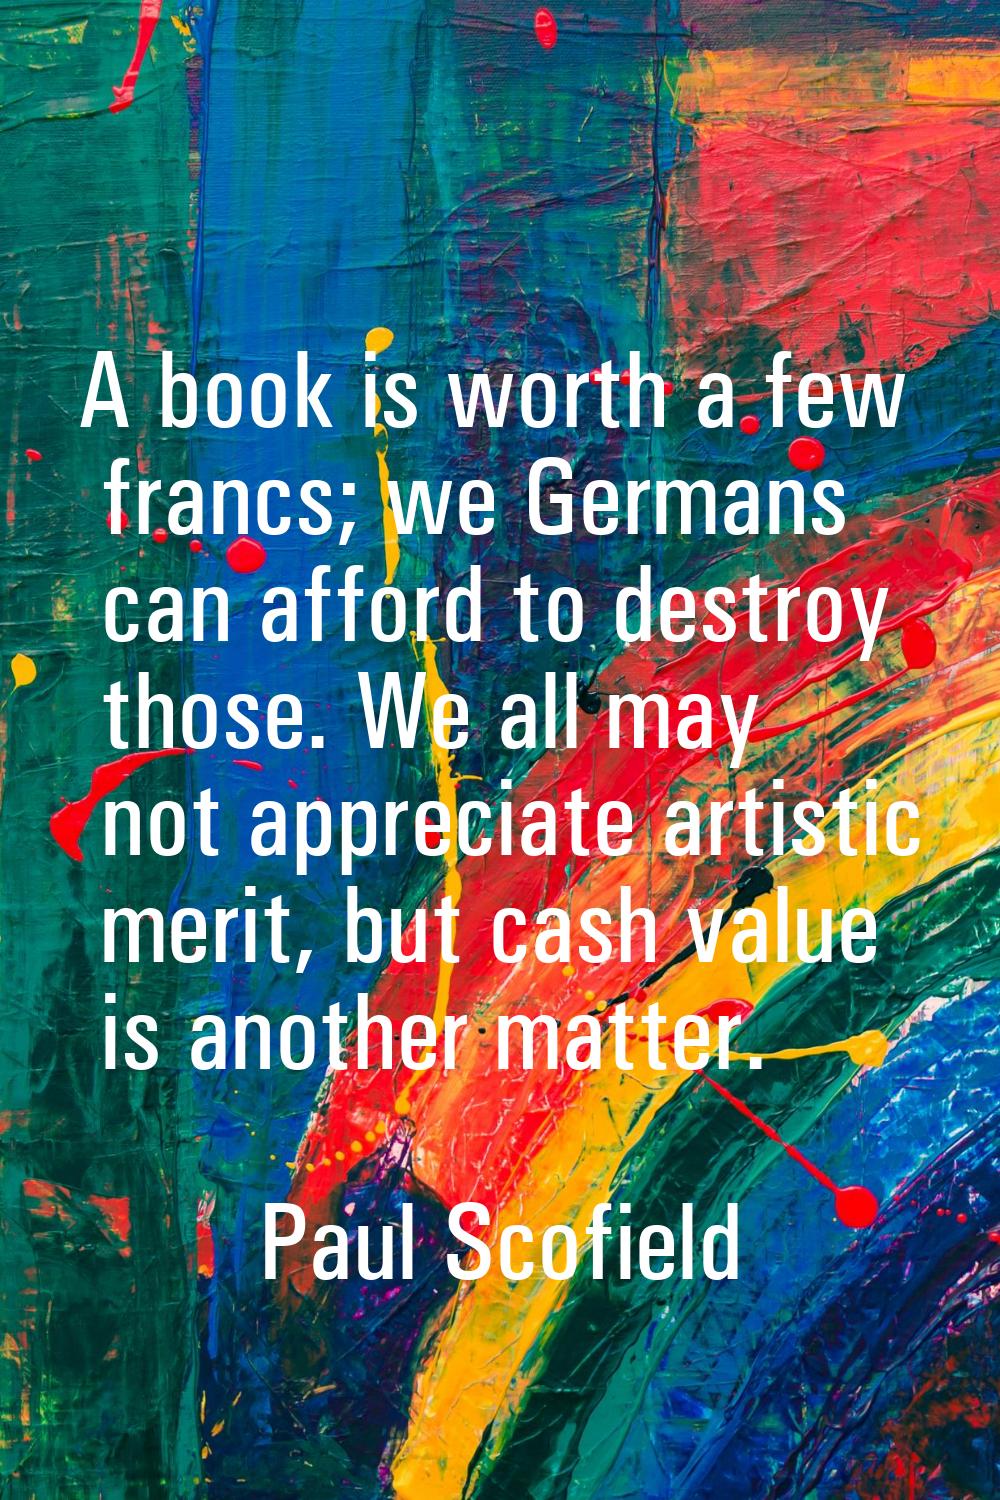 A book is worth a few francs; we Germans can afford to destroy those. We all may not appreciate art